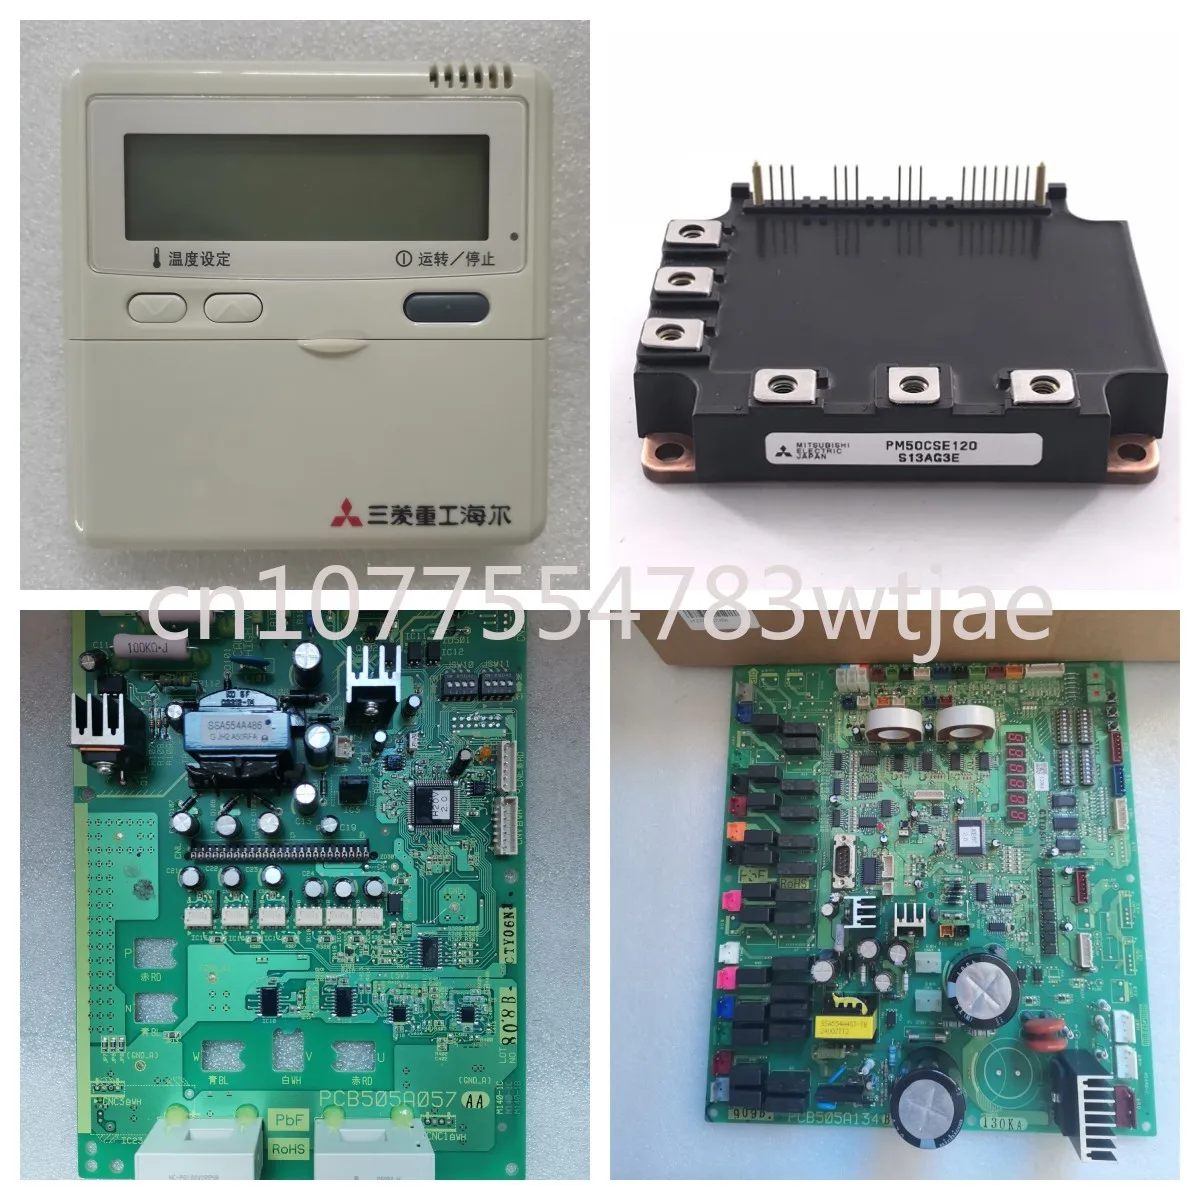 

Suitable for Mitsubishi Central Air Conditioning Accessories Contactor Power Module Screw Machine Control Board